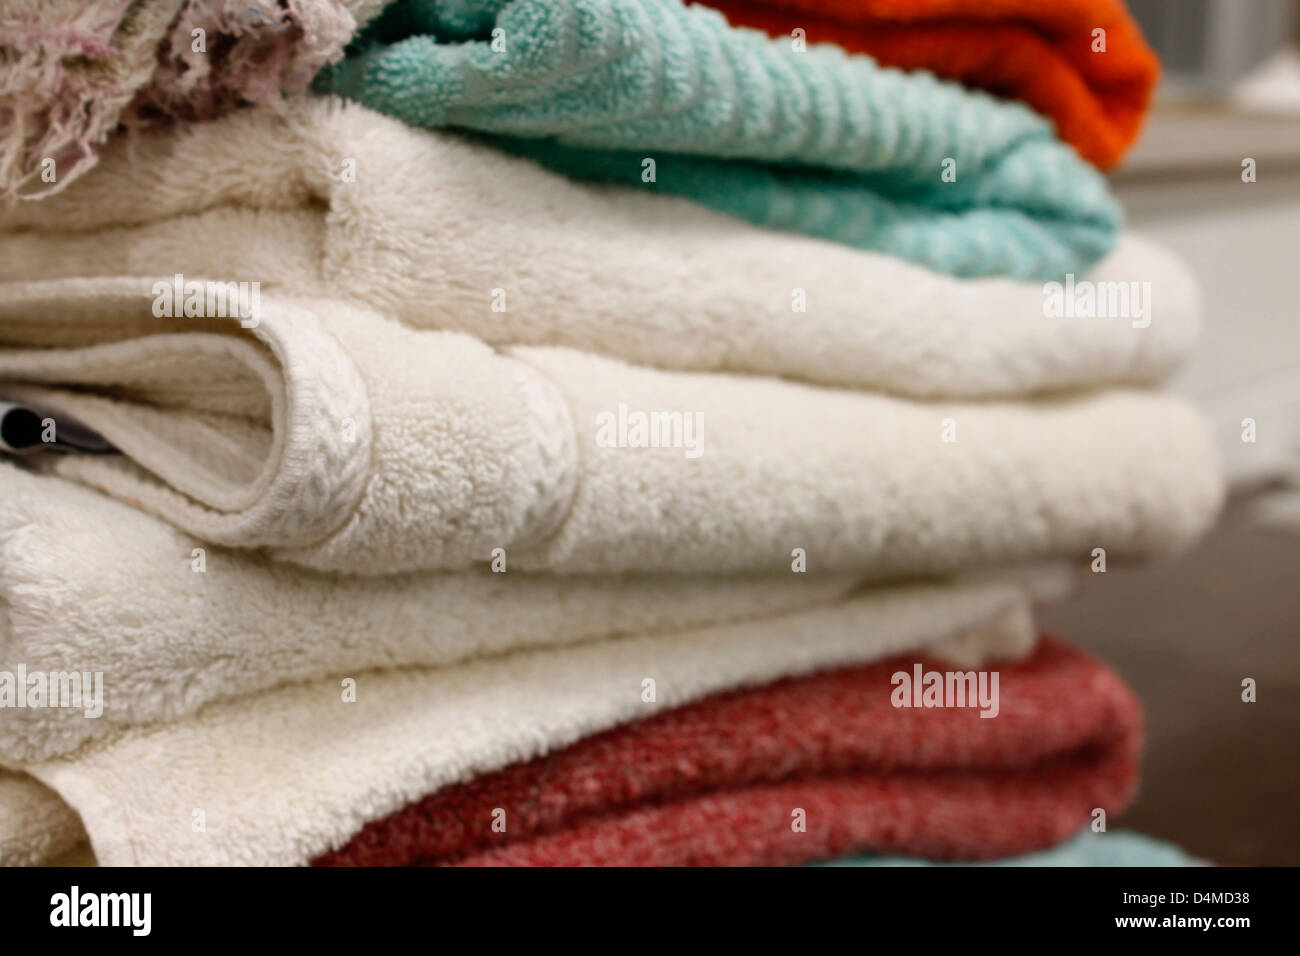 towels, white, off white, green, red, close up Stock Photo